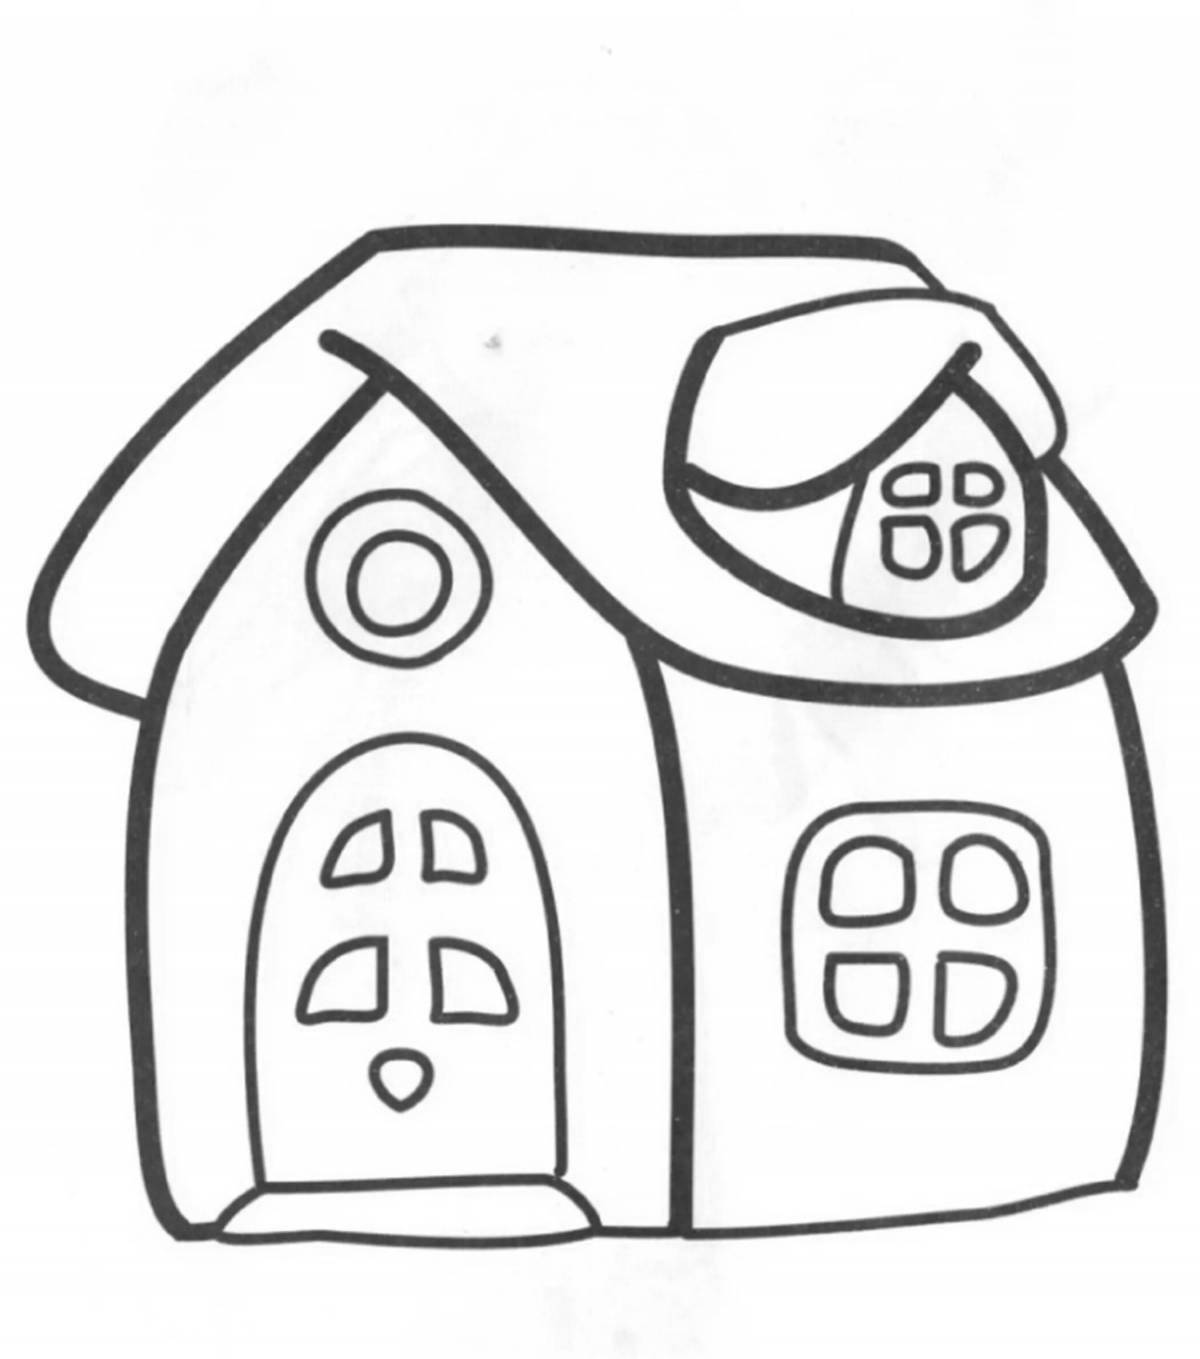 Coloring page nice house for children 2-3 years old